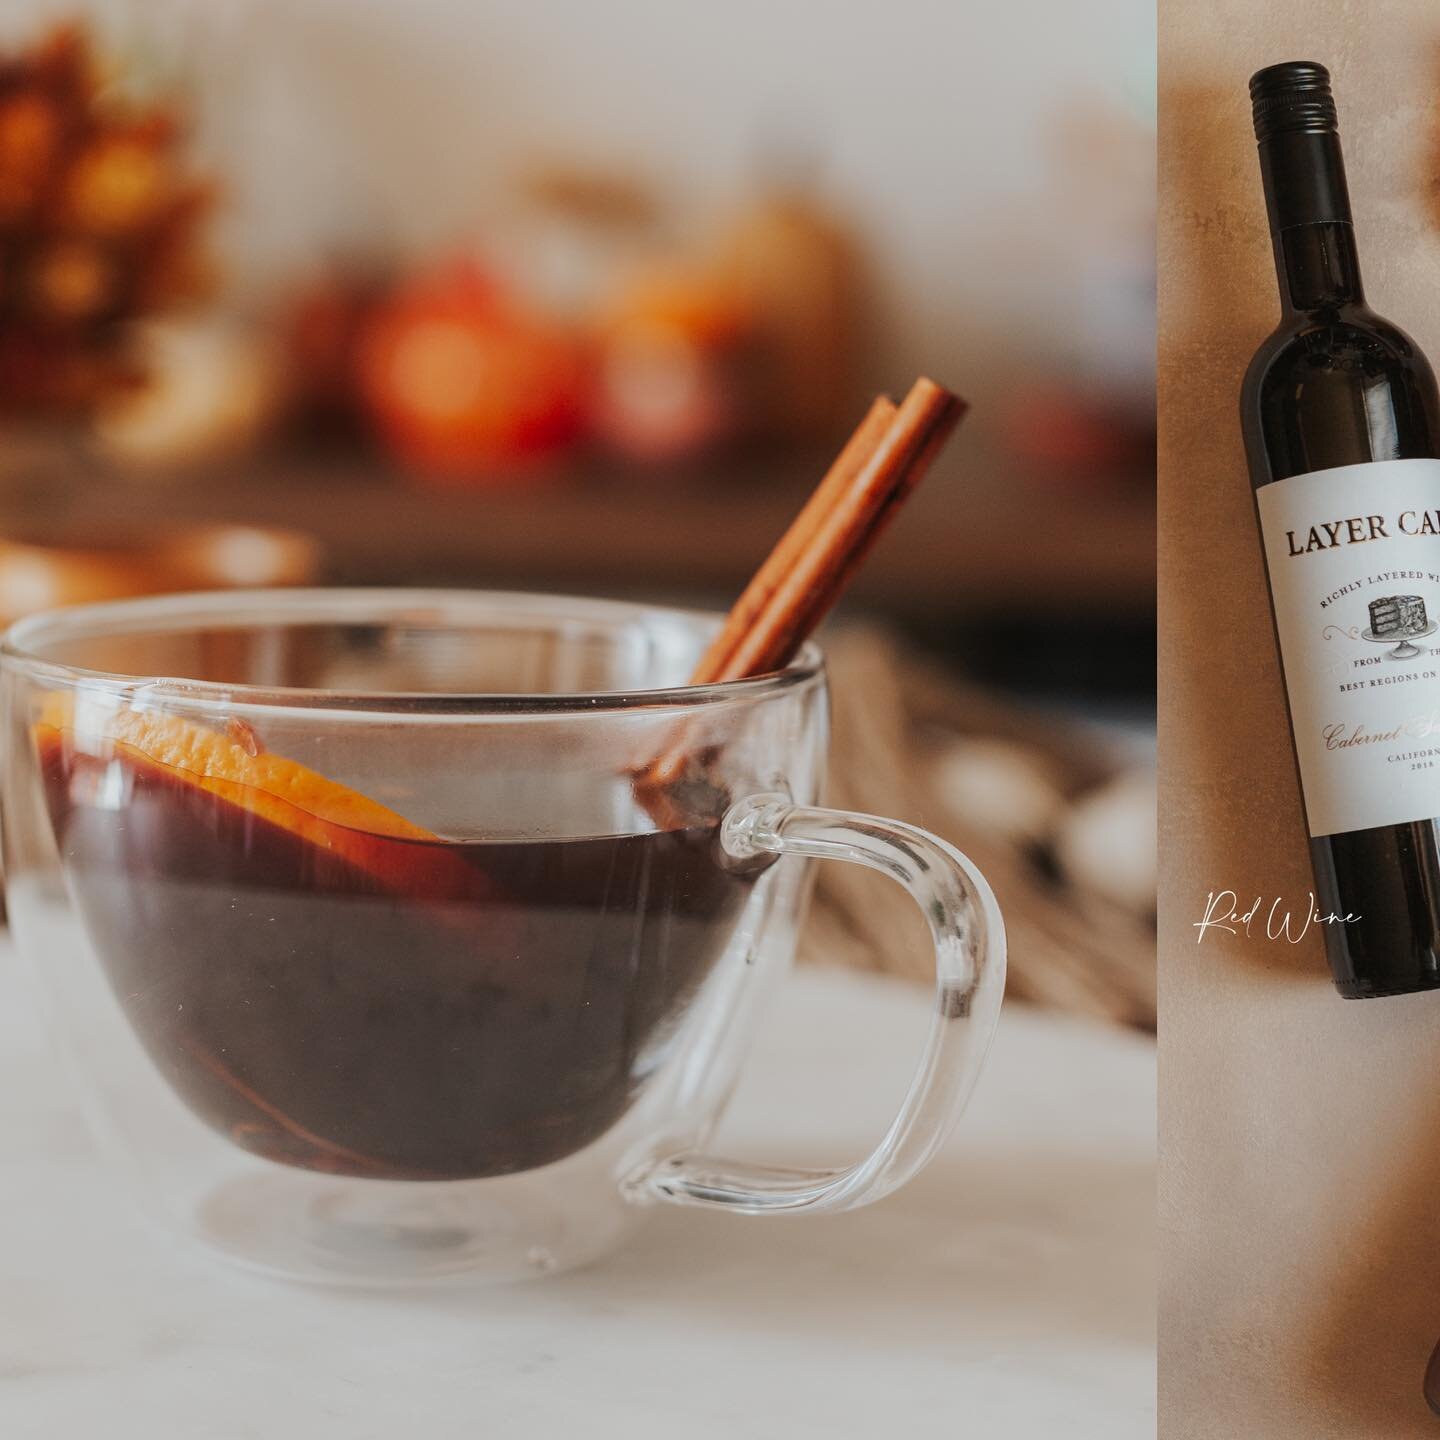 Nothing reminds us of winter more than having a cocktail to warm up your hands and the sweet aroma of cinnamon, orange, and cloves throughout the house&ndash;which is exactly why we have been LOVING this Cozy Mulled Wine.

The recipe is SO simple (ju